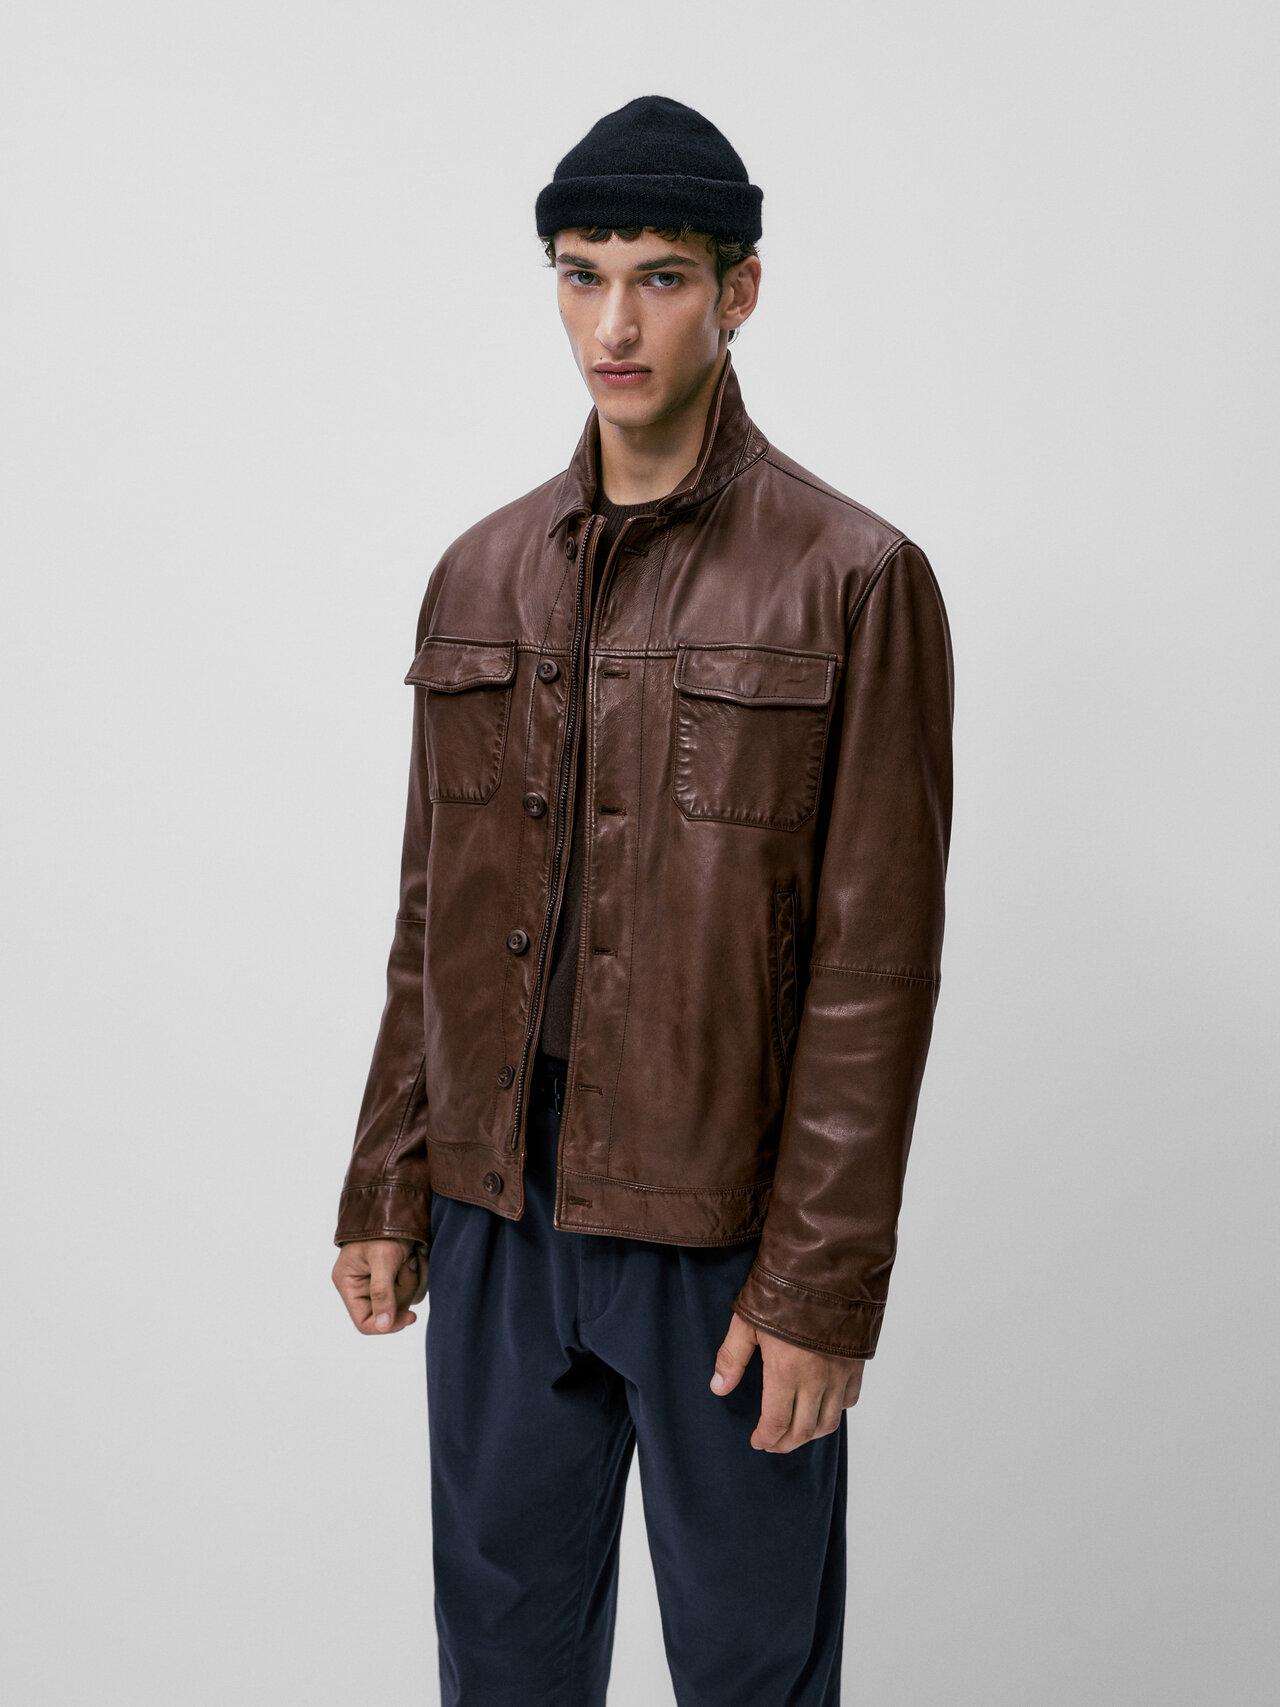 MASSIMO DUTTI Nappa Leather Jacket With Pockets in Brown for Men | Lyst